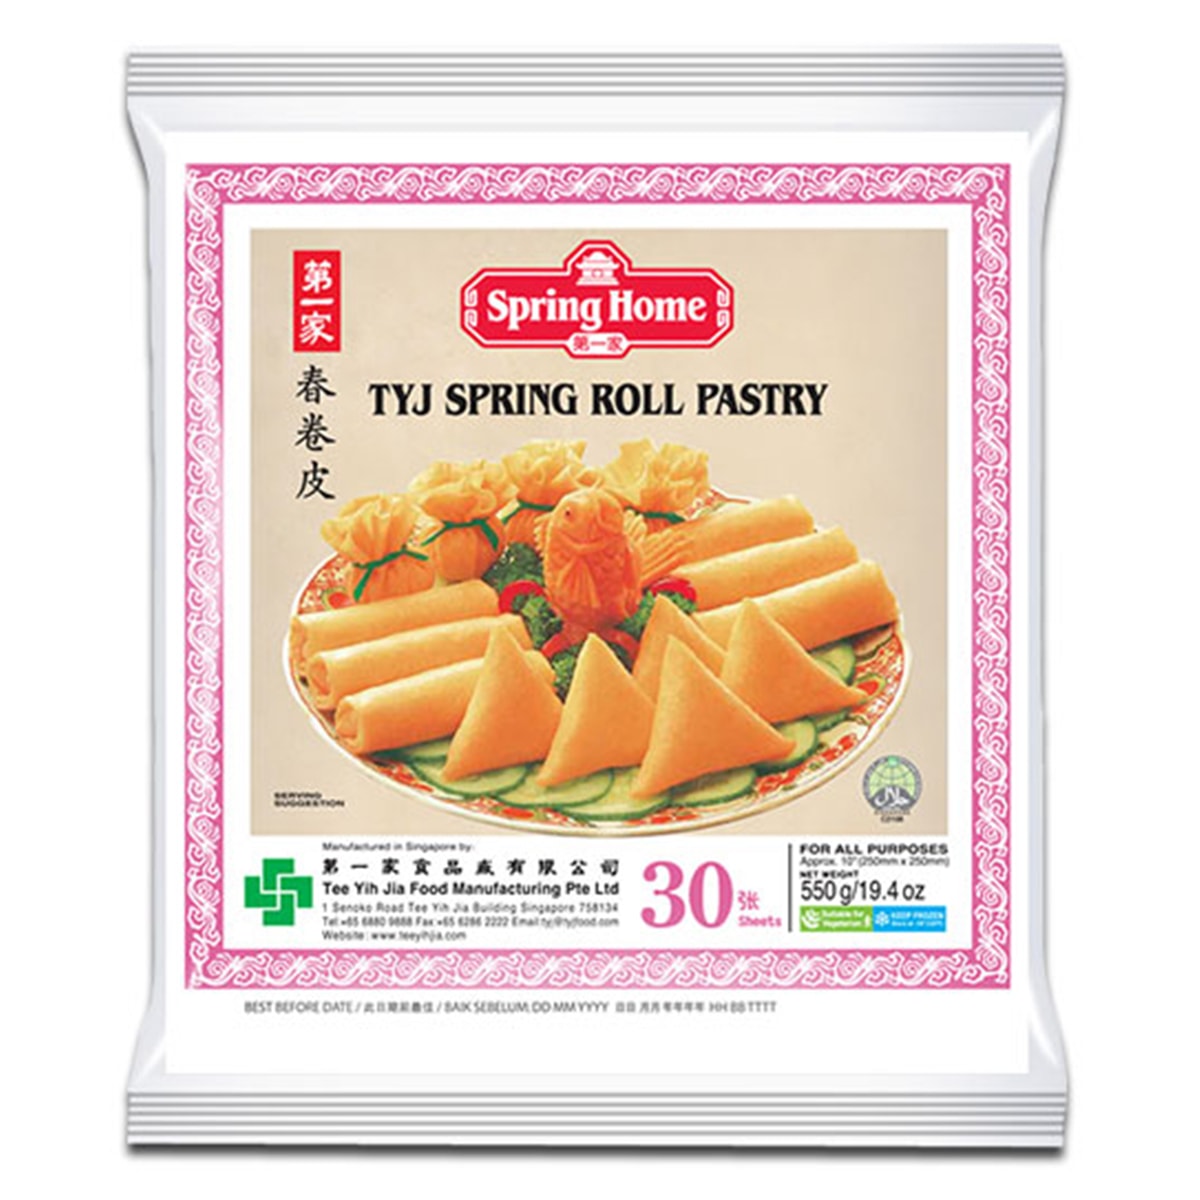 Buy Spring Home Frozen Tyg Spring Roll Pastry 30 Sheets [10 Inch (250mm) Square](Plain) - 550 gm